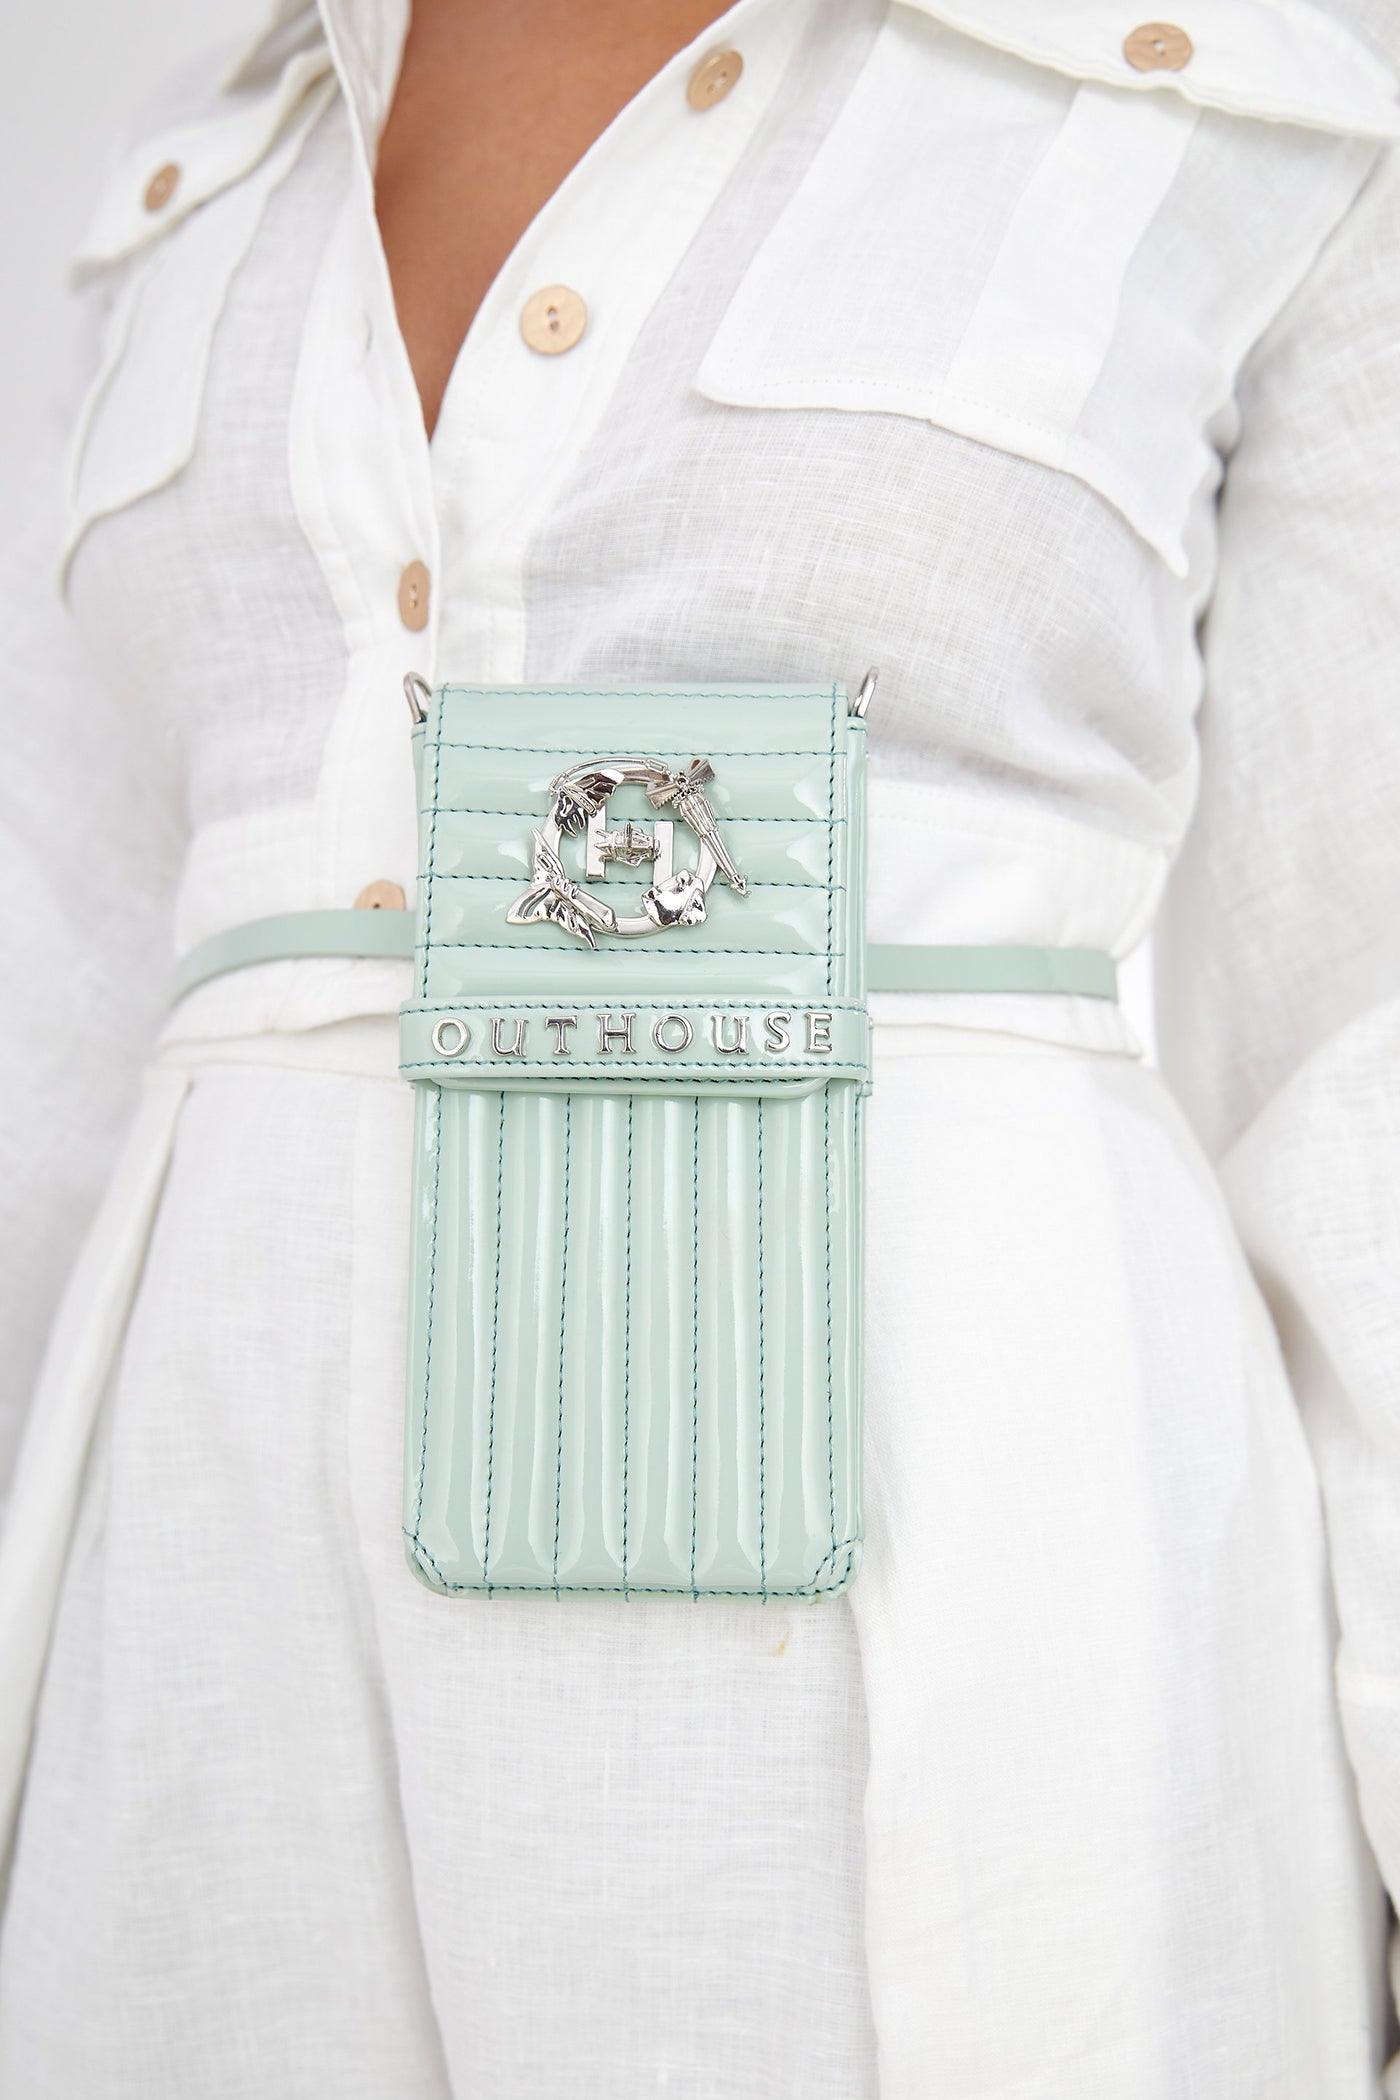 The OH V Birdie Phone Bag Mint Green